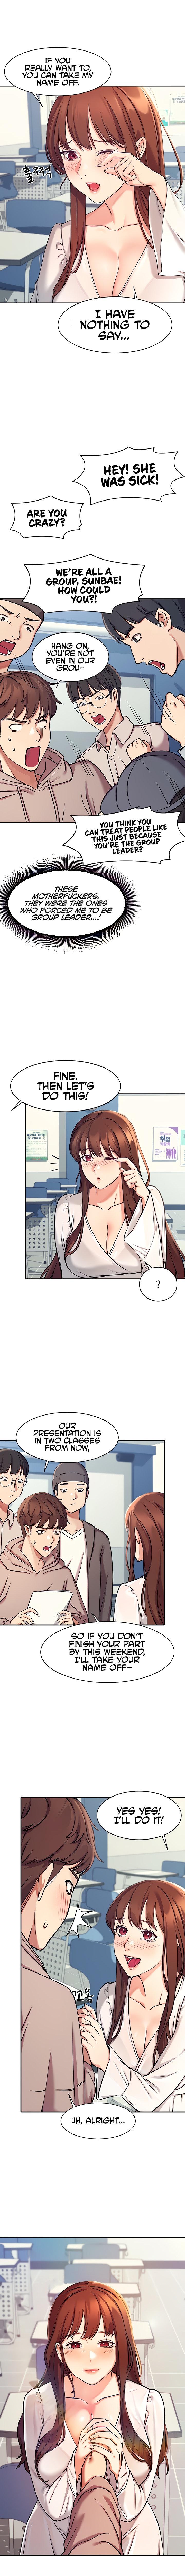 Is There No Goddess in My College? Ch.16/? 11